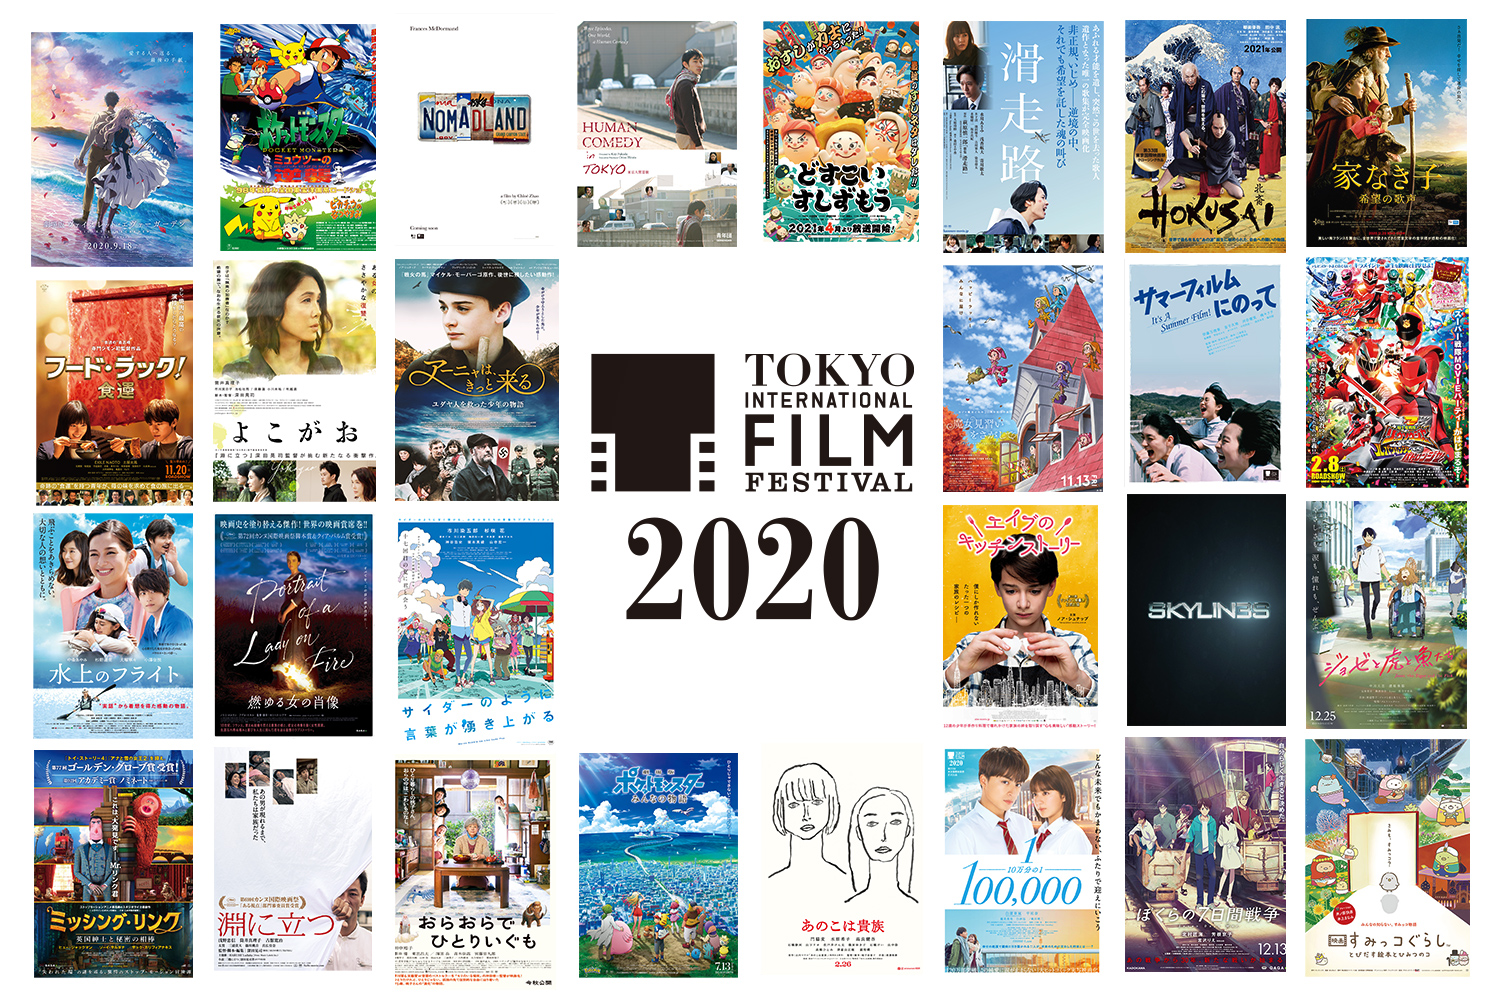 Special Screenings: This section, which premieres the latest films before being released in Japan, will screen the closing film this year as well as monumental and topical films. There will also be guest appearances by film stars and crew, which will surely enliven the festival.